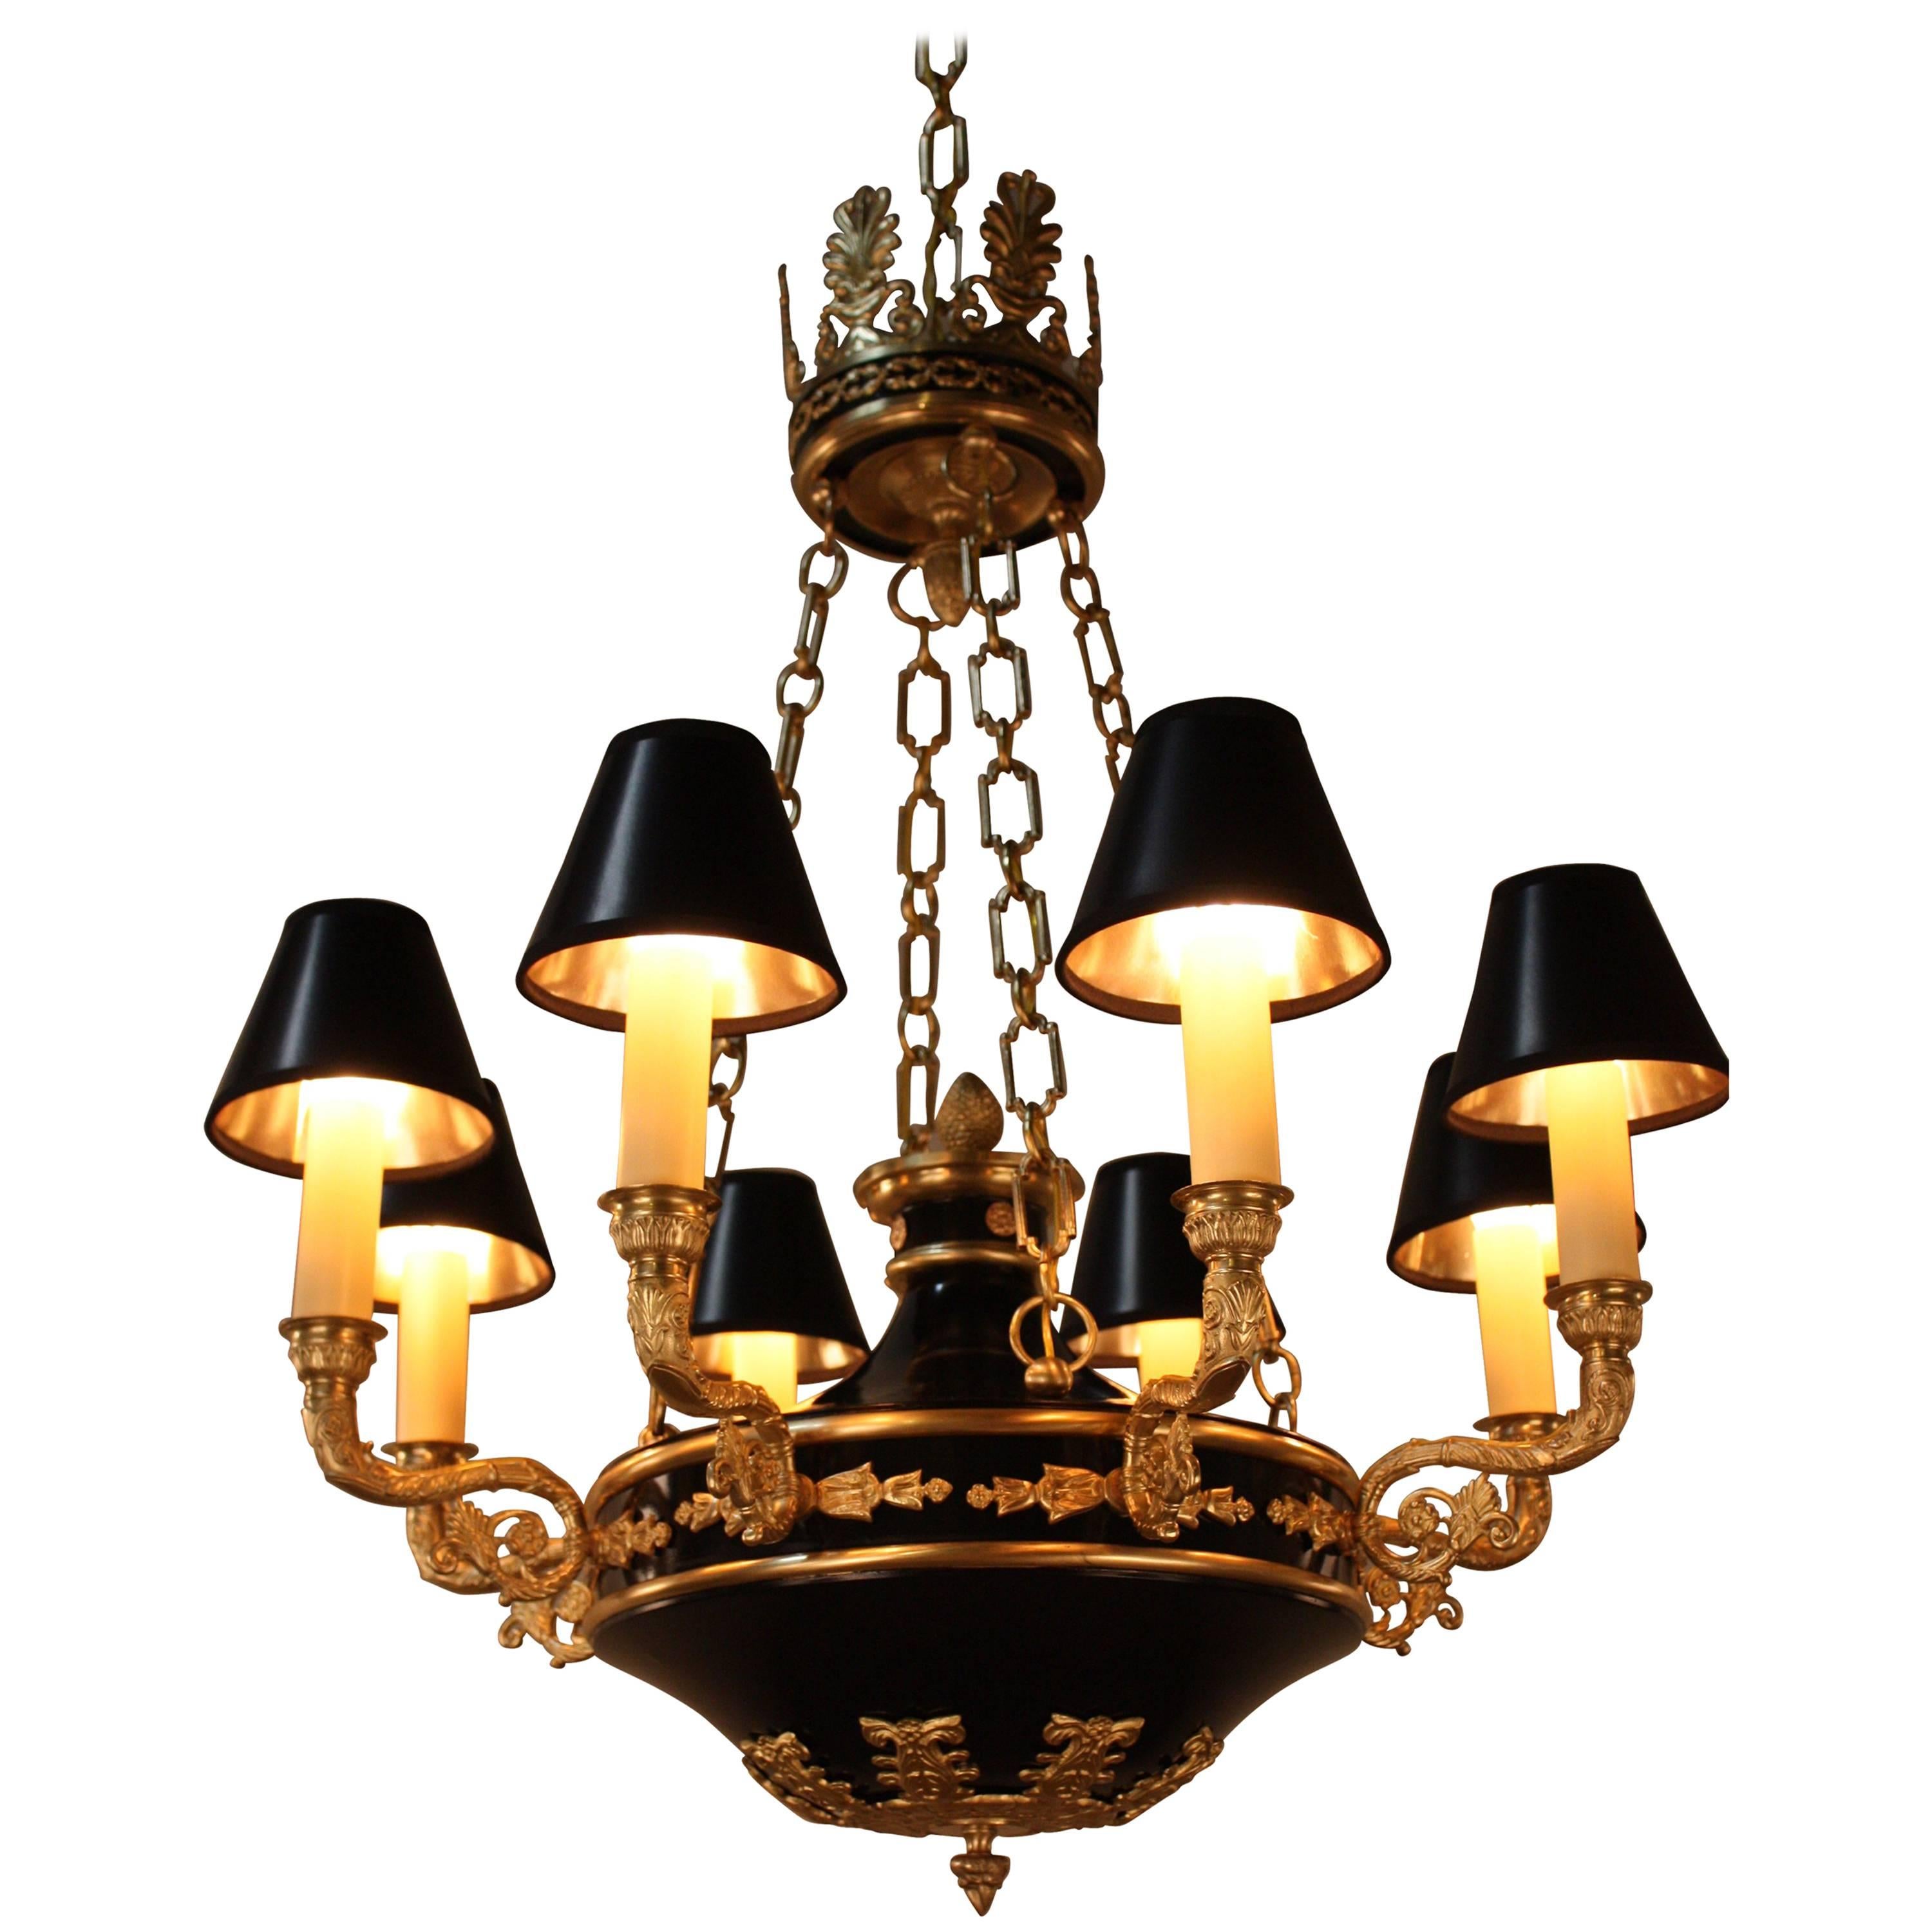 French Eight-Arm Empire Style Bronze Chandelier